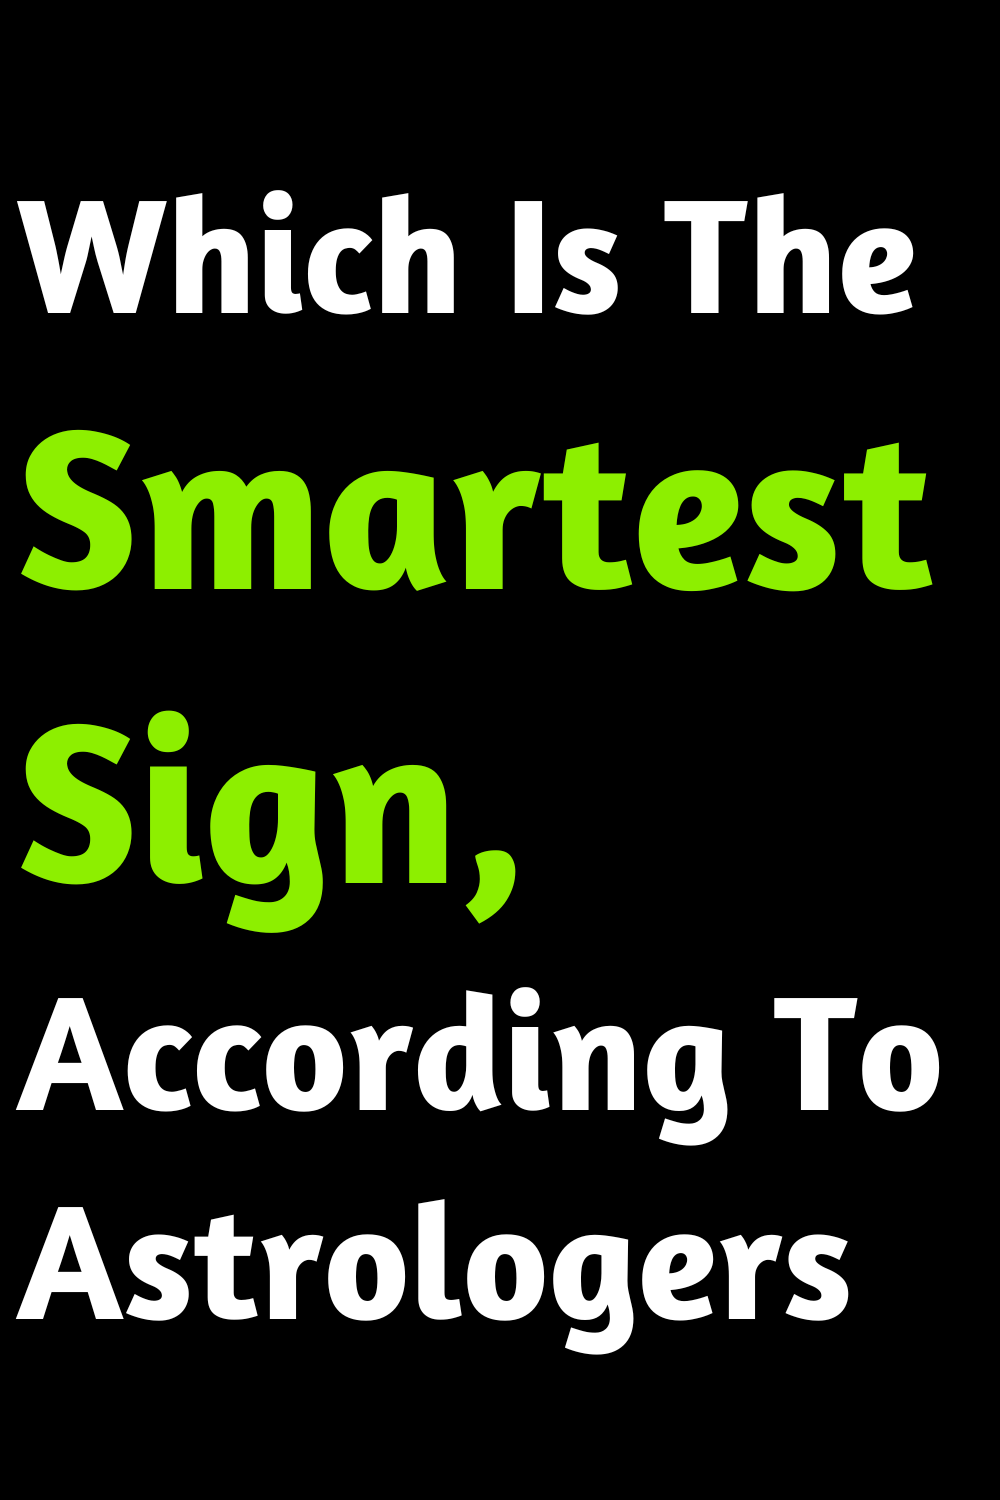 Which Is The Smartest Sign, According To Astrologers